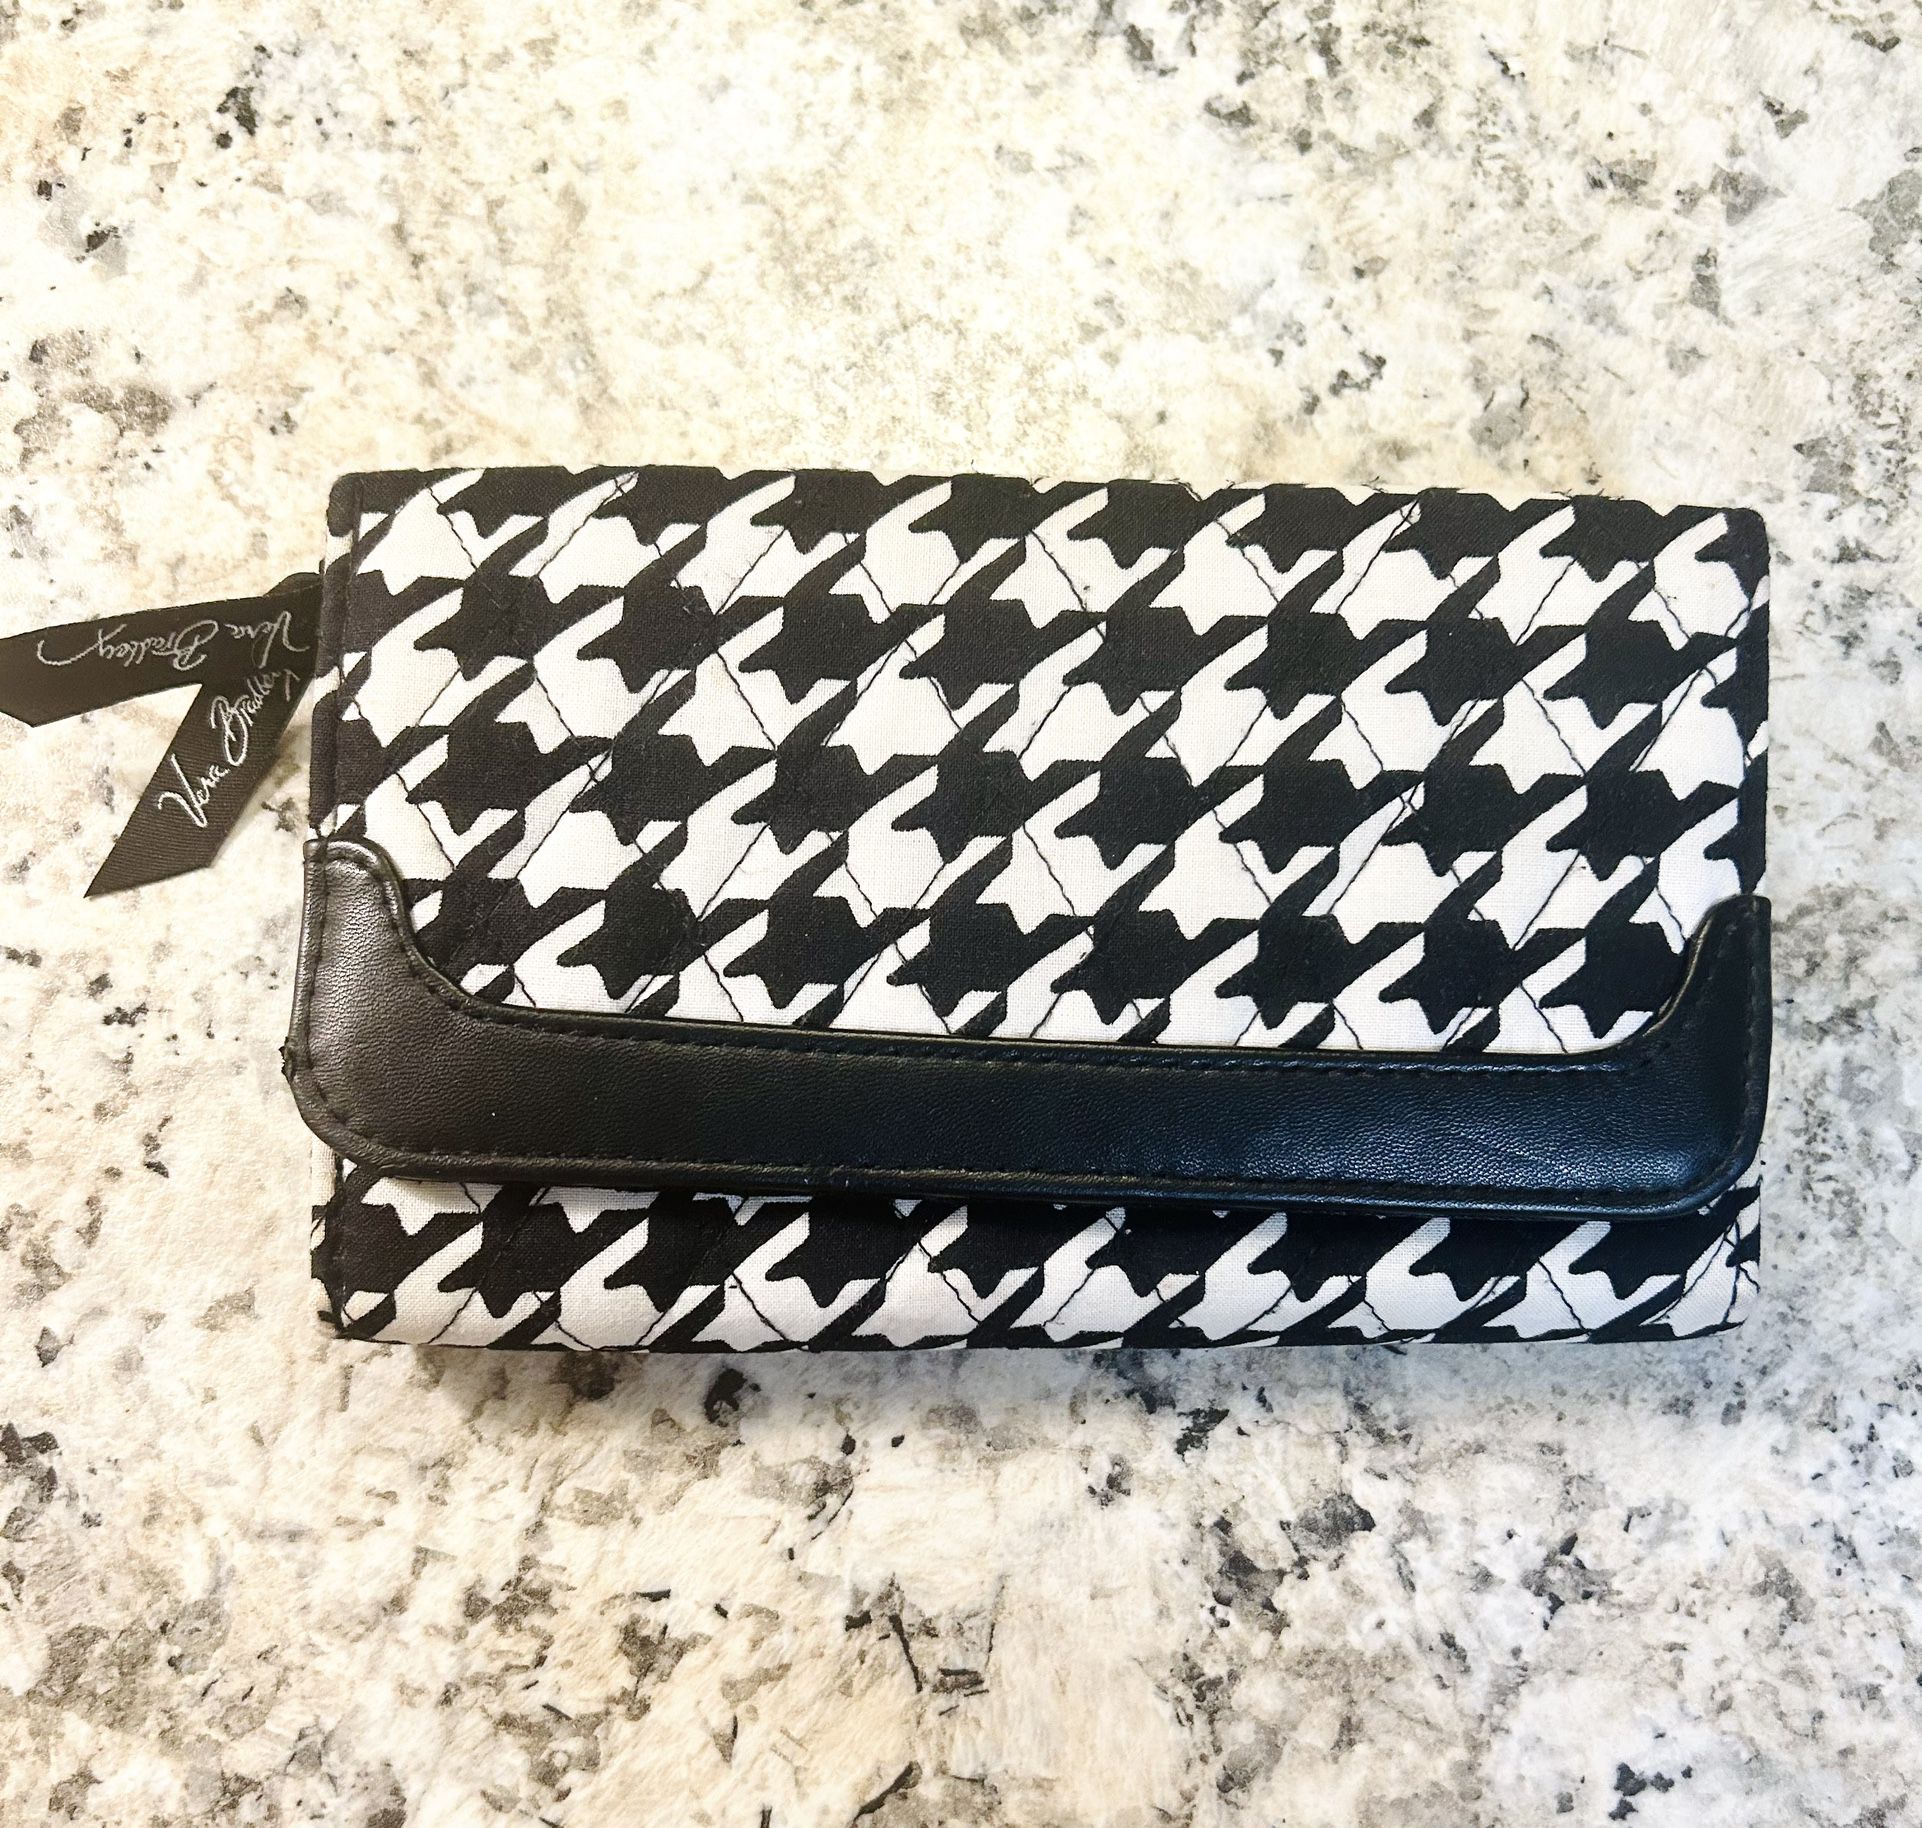 Vera Bradley-Black/White Houndstooth Trifold Clutch Wallet Leather Detail On Quilted Cotton